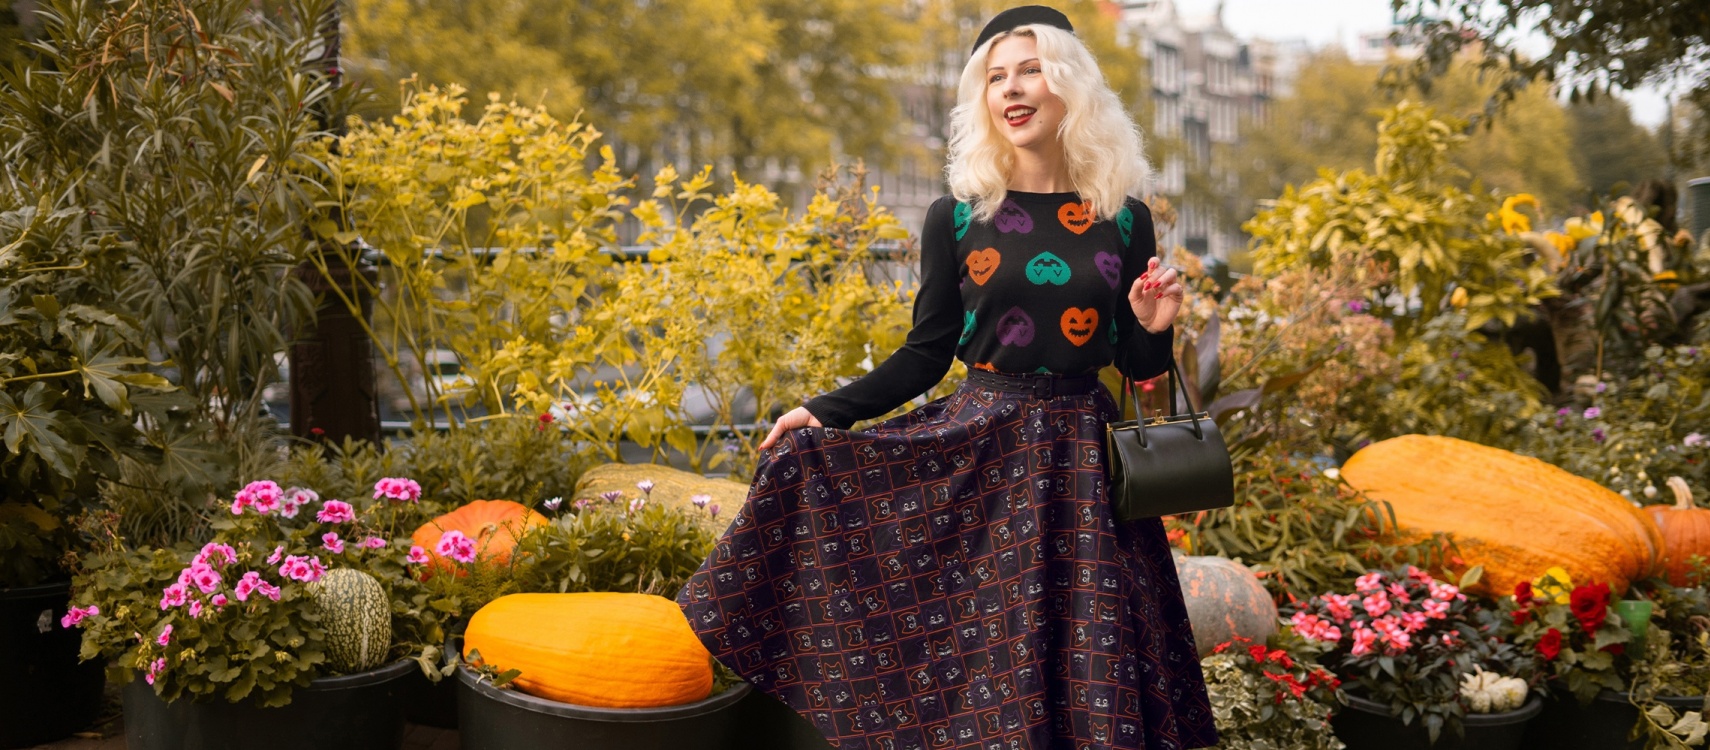 Celebrate Halloween in style with these enchanting looks